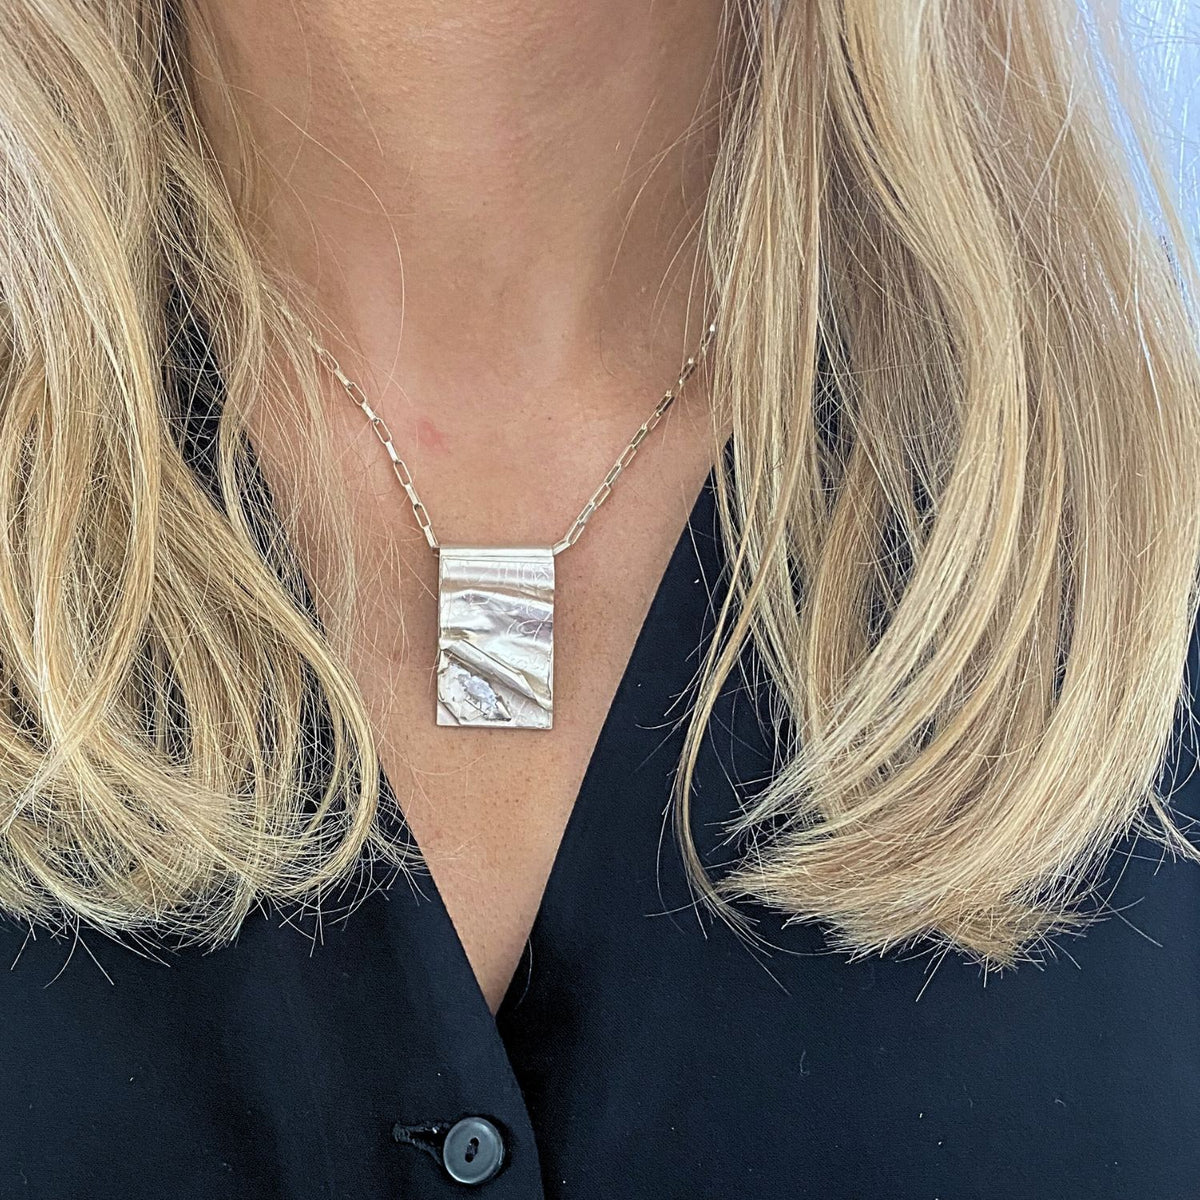 One of a Kind: (No 15.) Bespoke Silver and Diamond Slice Pendant